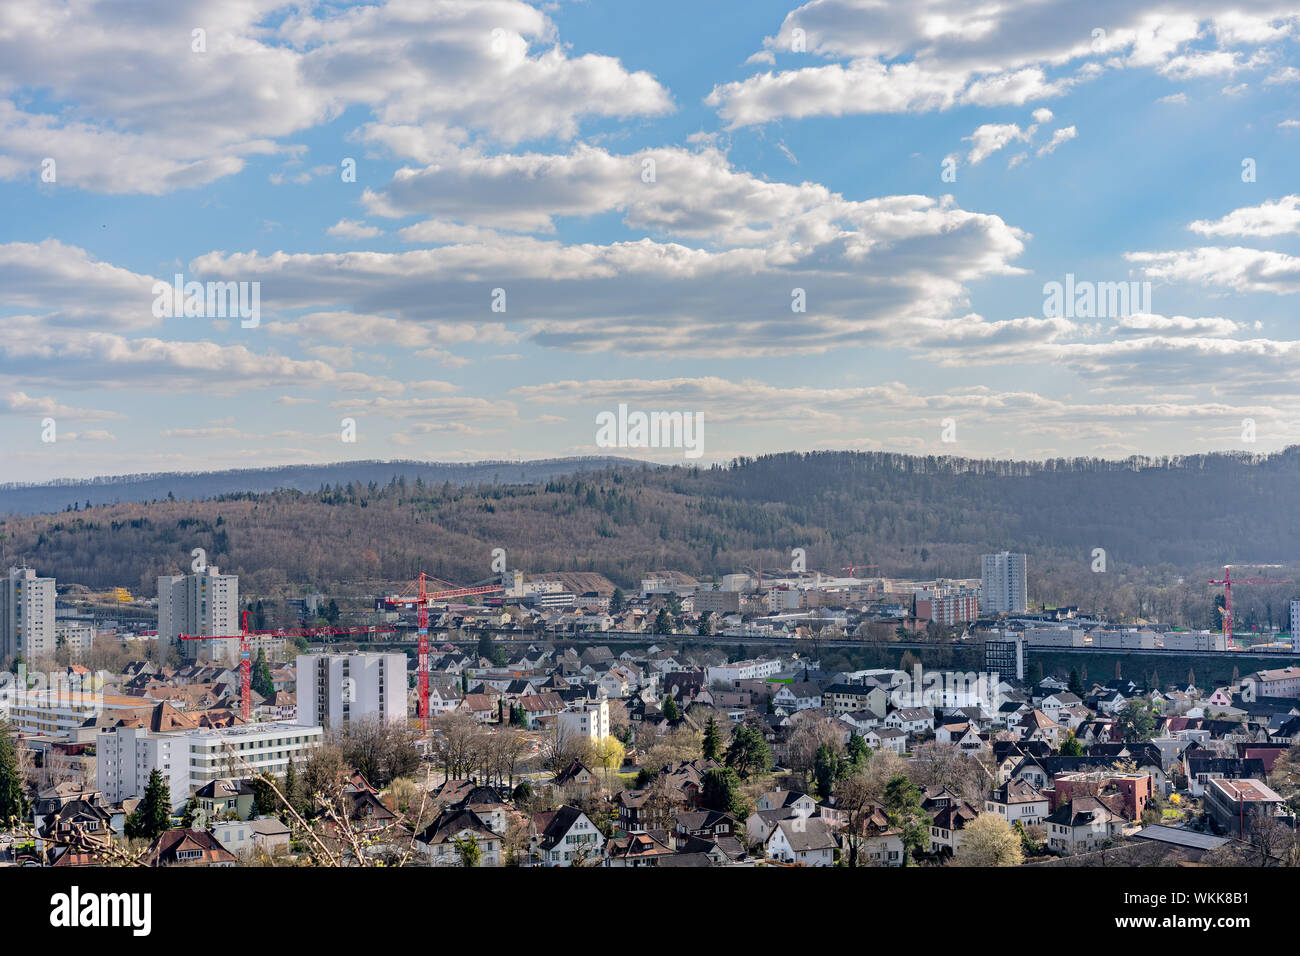 Cityscape of Brugg West with residential districts, industry and the railway embankment. Stock Photo